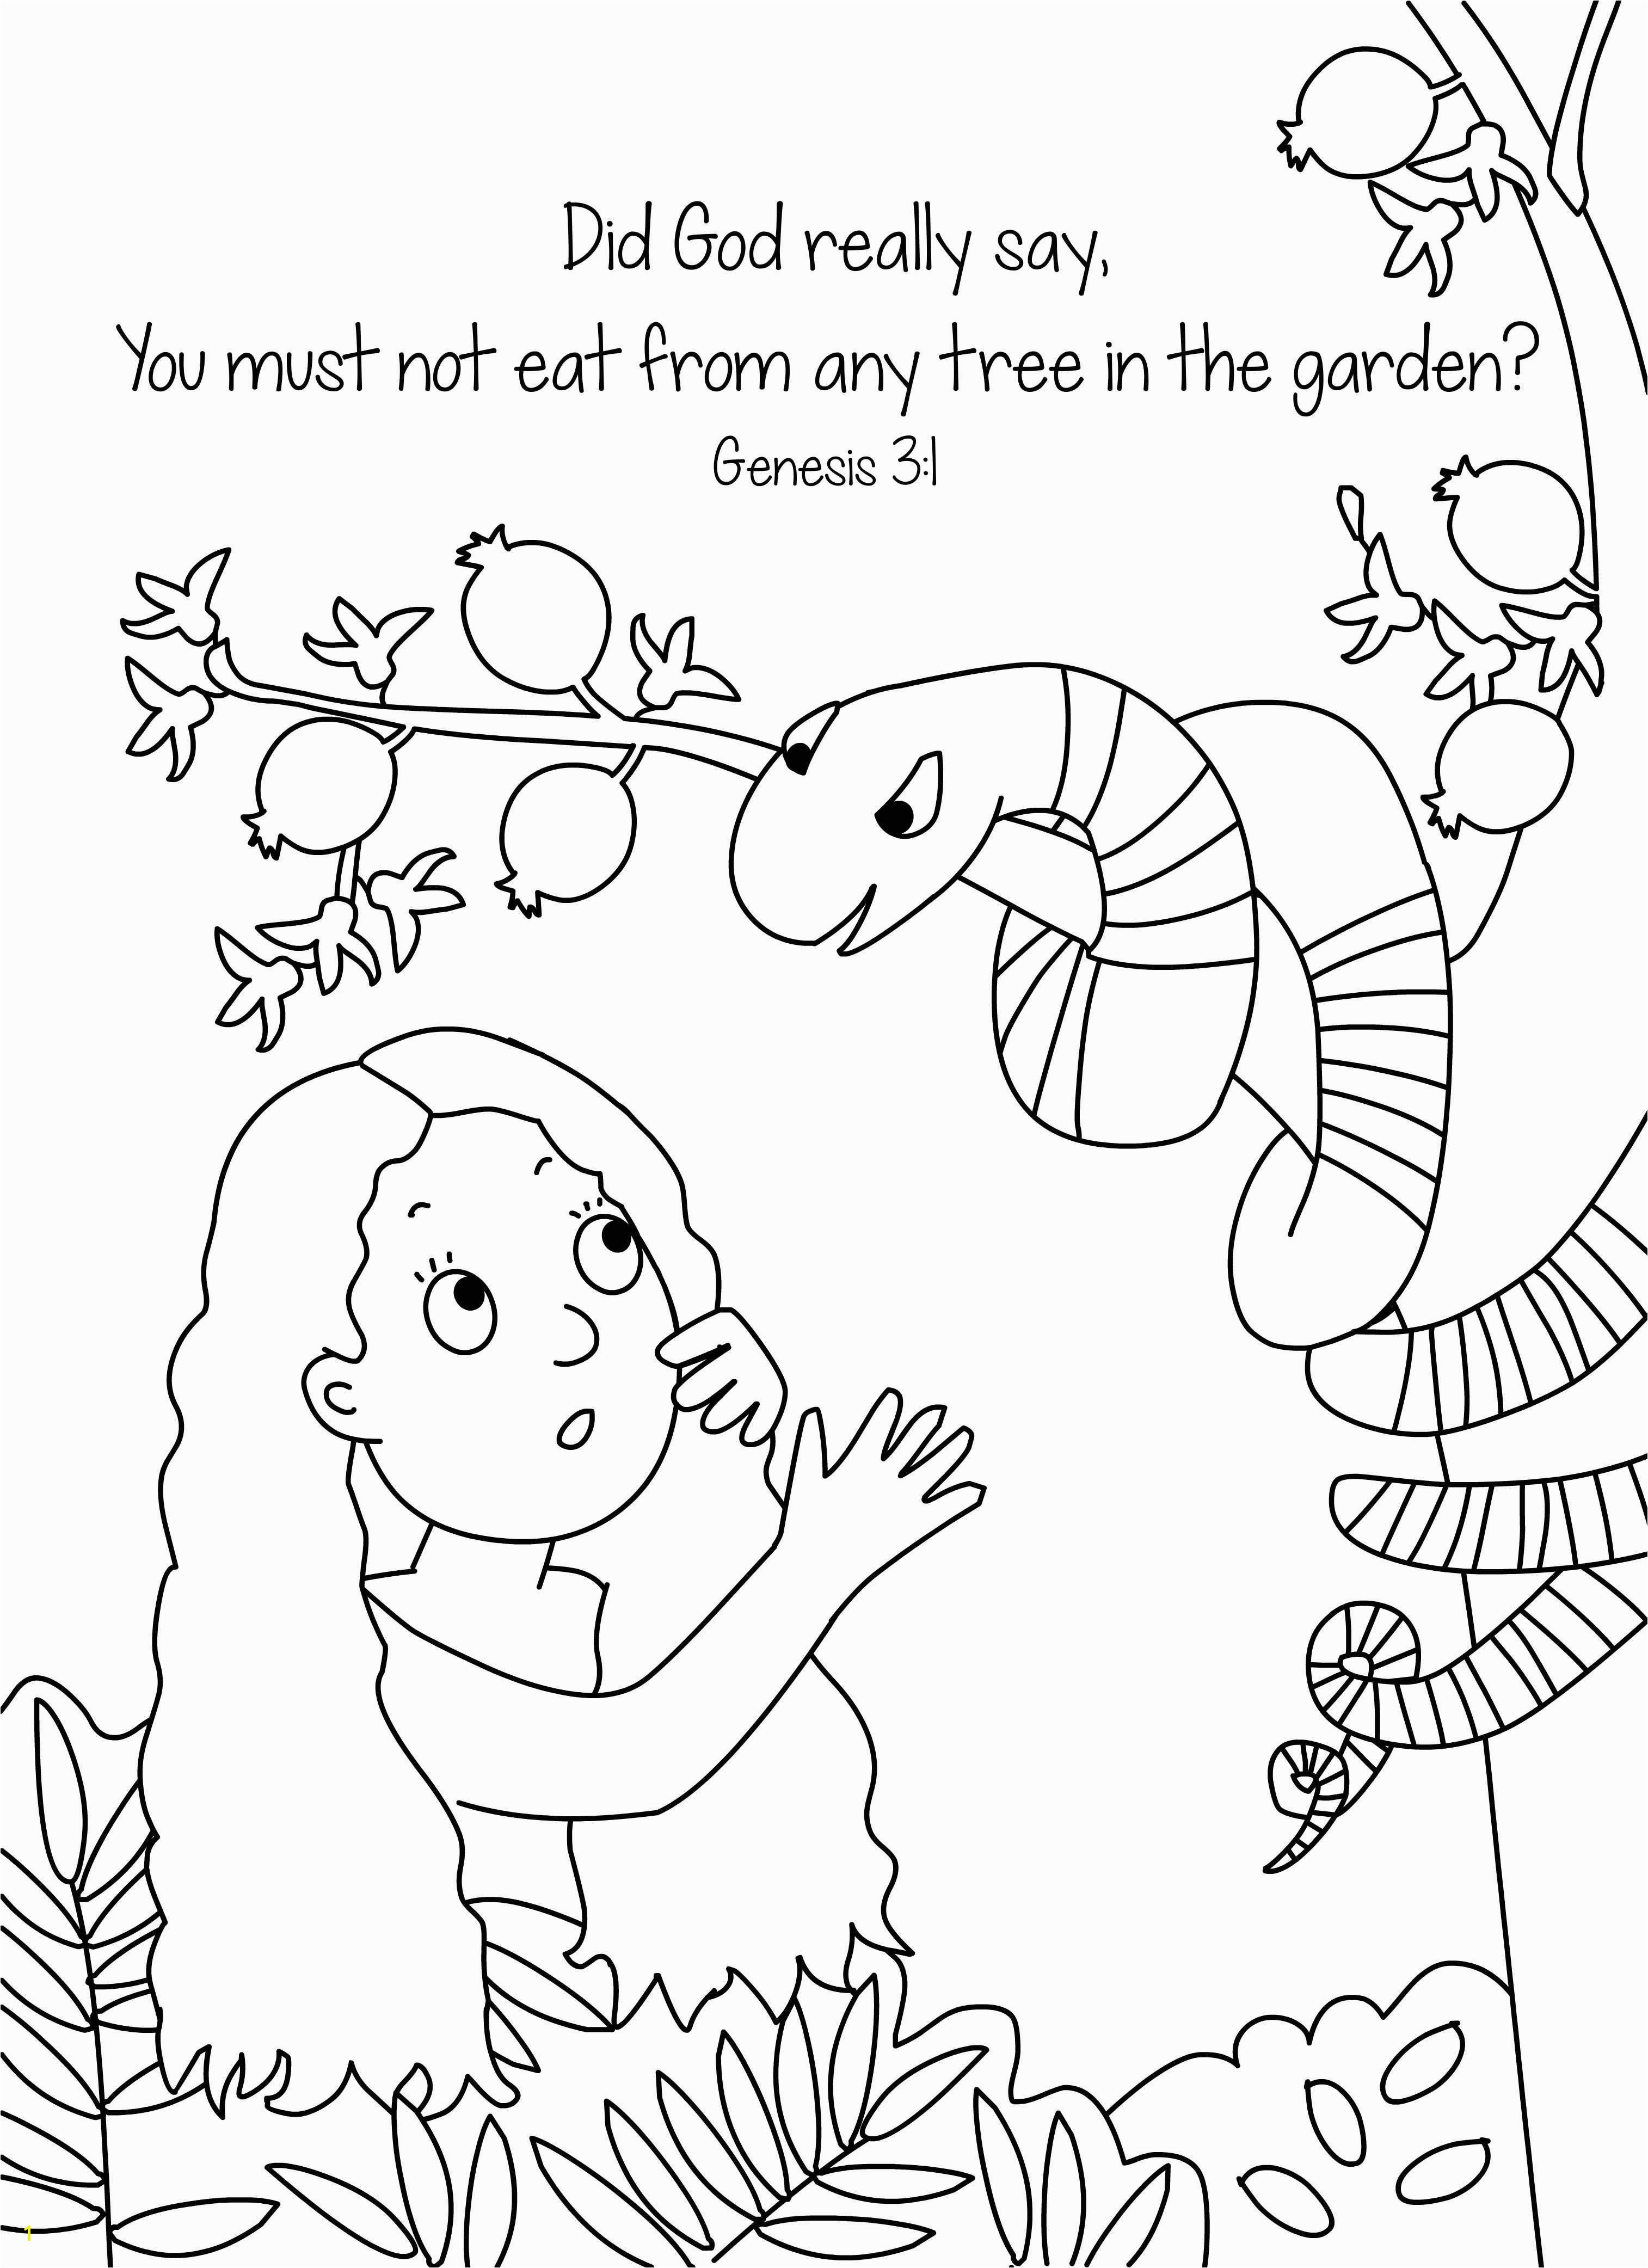 Adam and Eve In the Garden Of Eden Coloring Pages Adam and Eve Coloring Pages for Kids Adam and Eve and the Sneaky